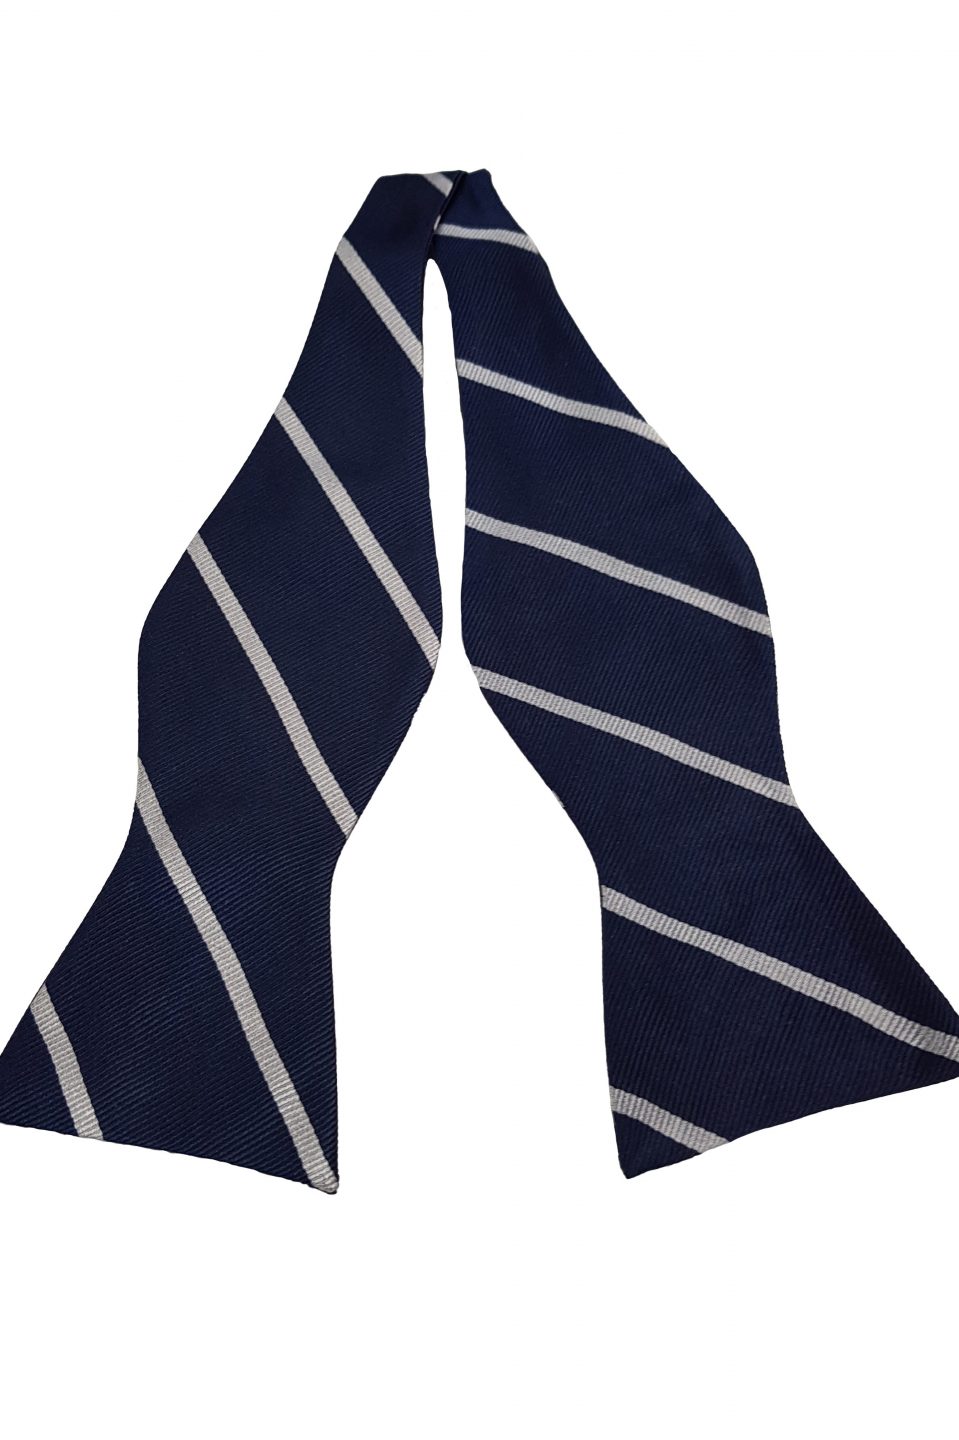 Trinity College Striped Bow Tie | Walters of Oxford